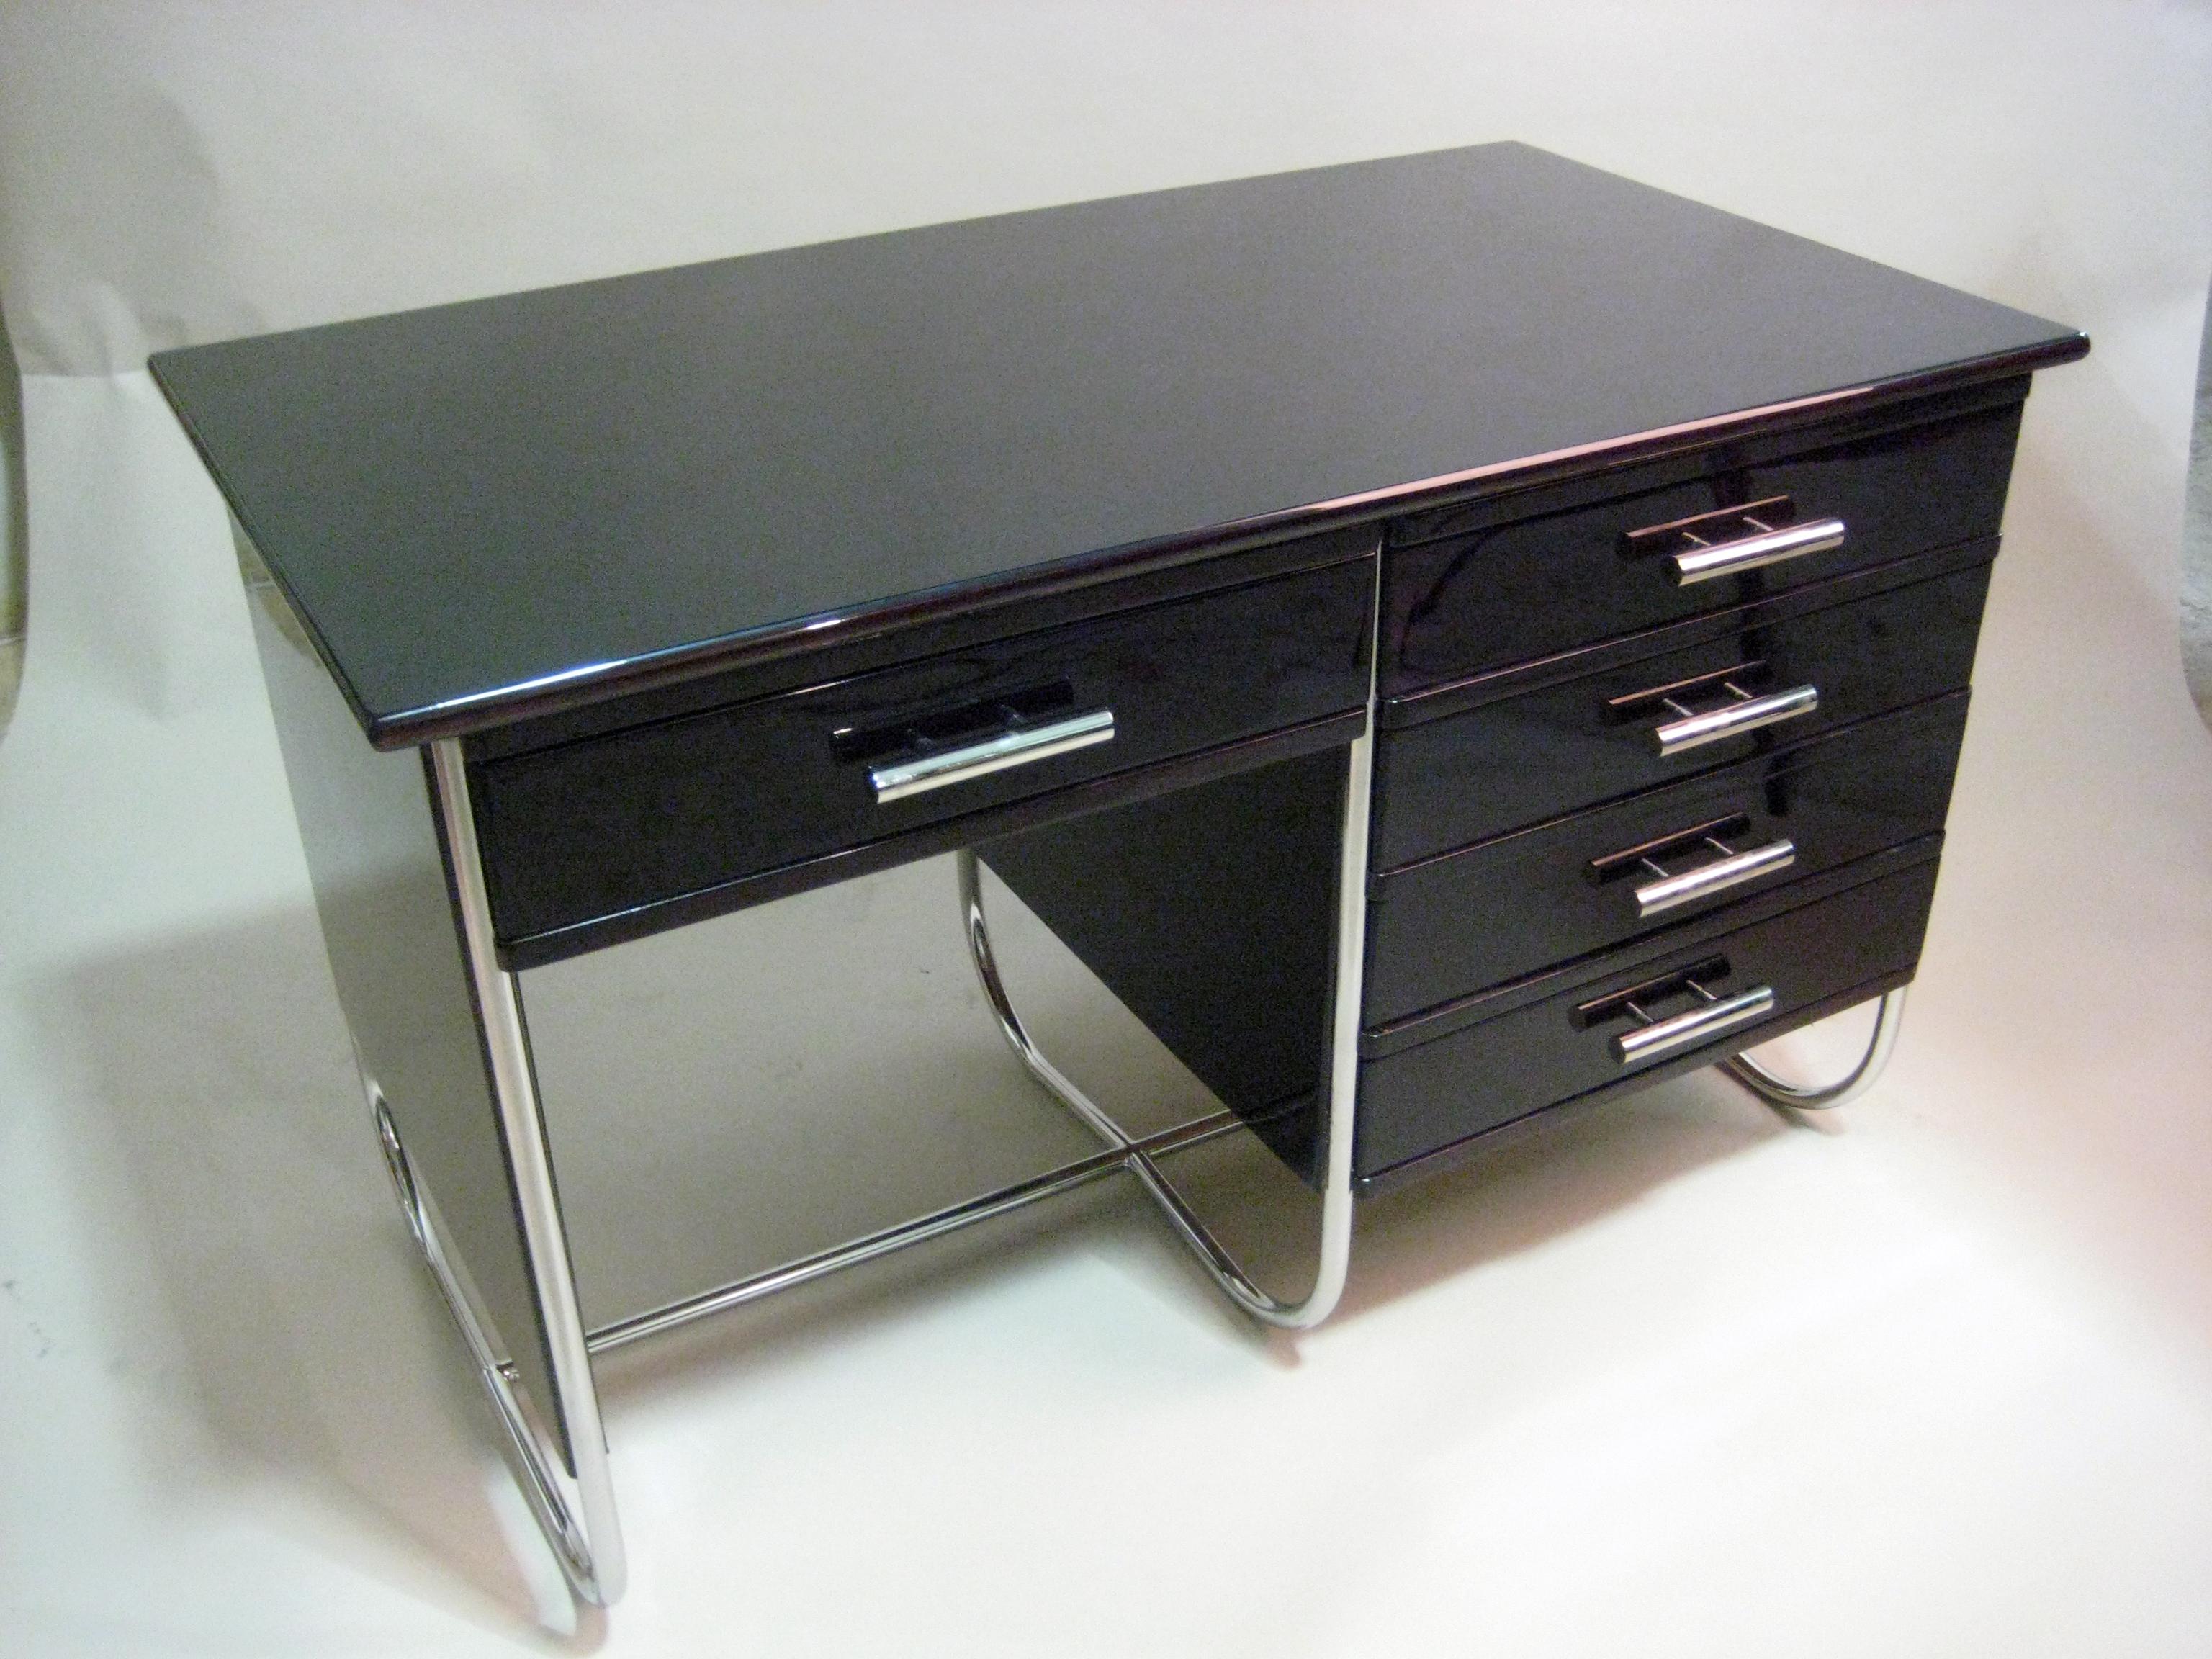 This sleek desk has all the influences of Breuer’s iconic S 285/2 Writing Desk; shiny tubular chrome frames the high-gloss wood storage elements. Whether used as a centerpiece in a home office or den, this modern desk’s compact size also makes it a